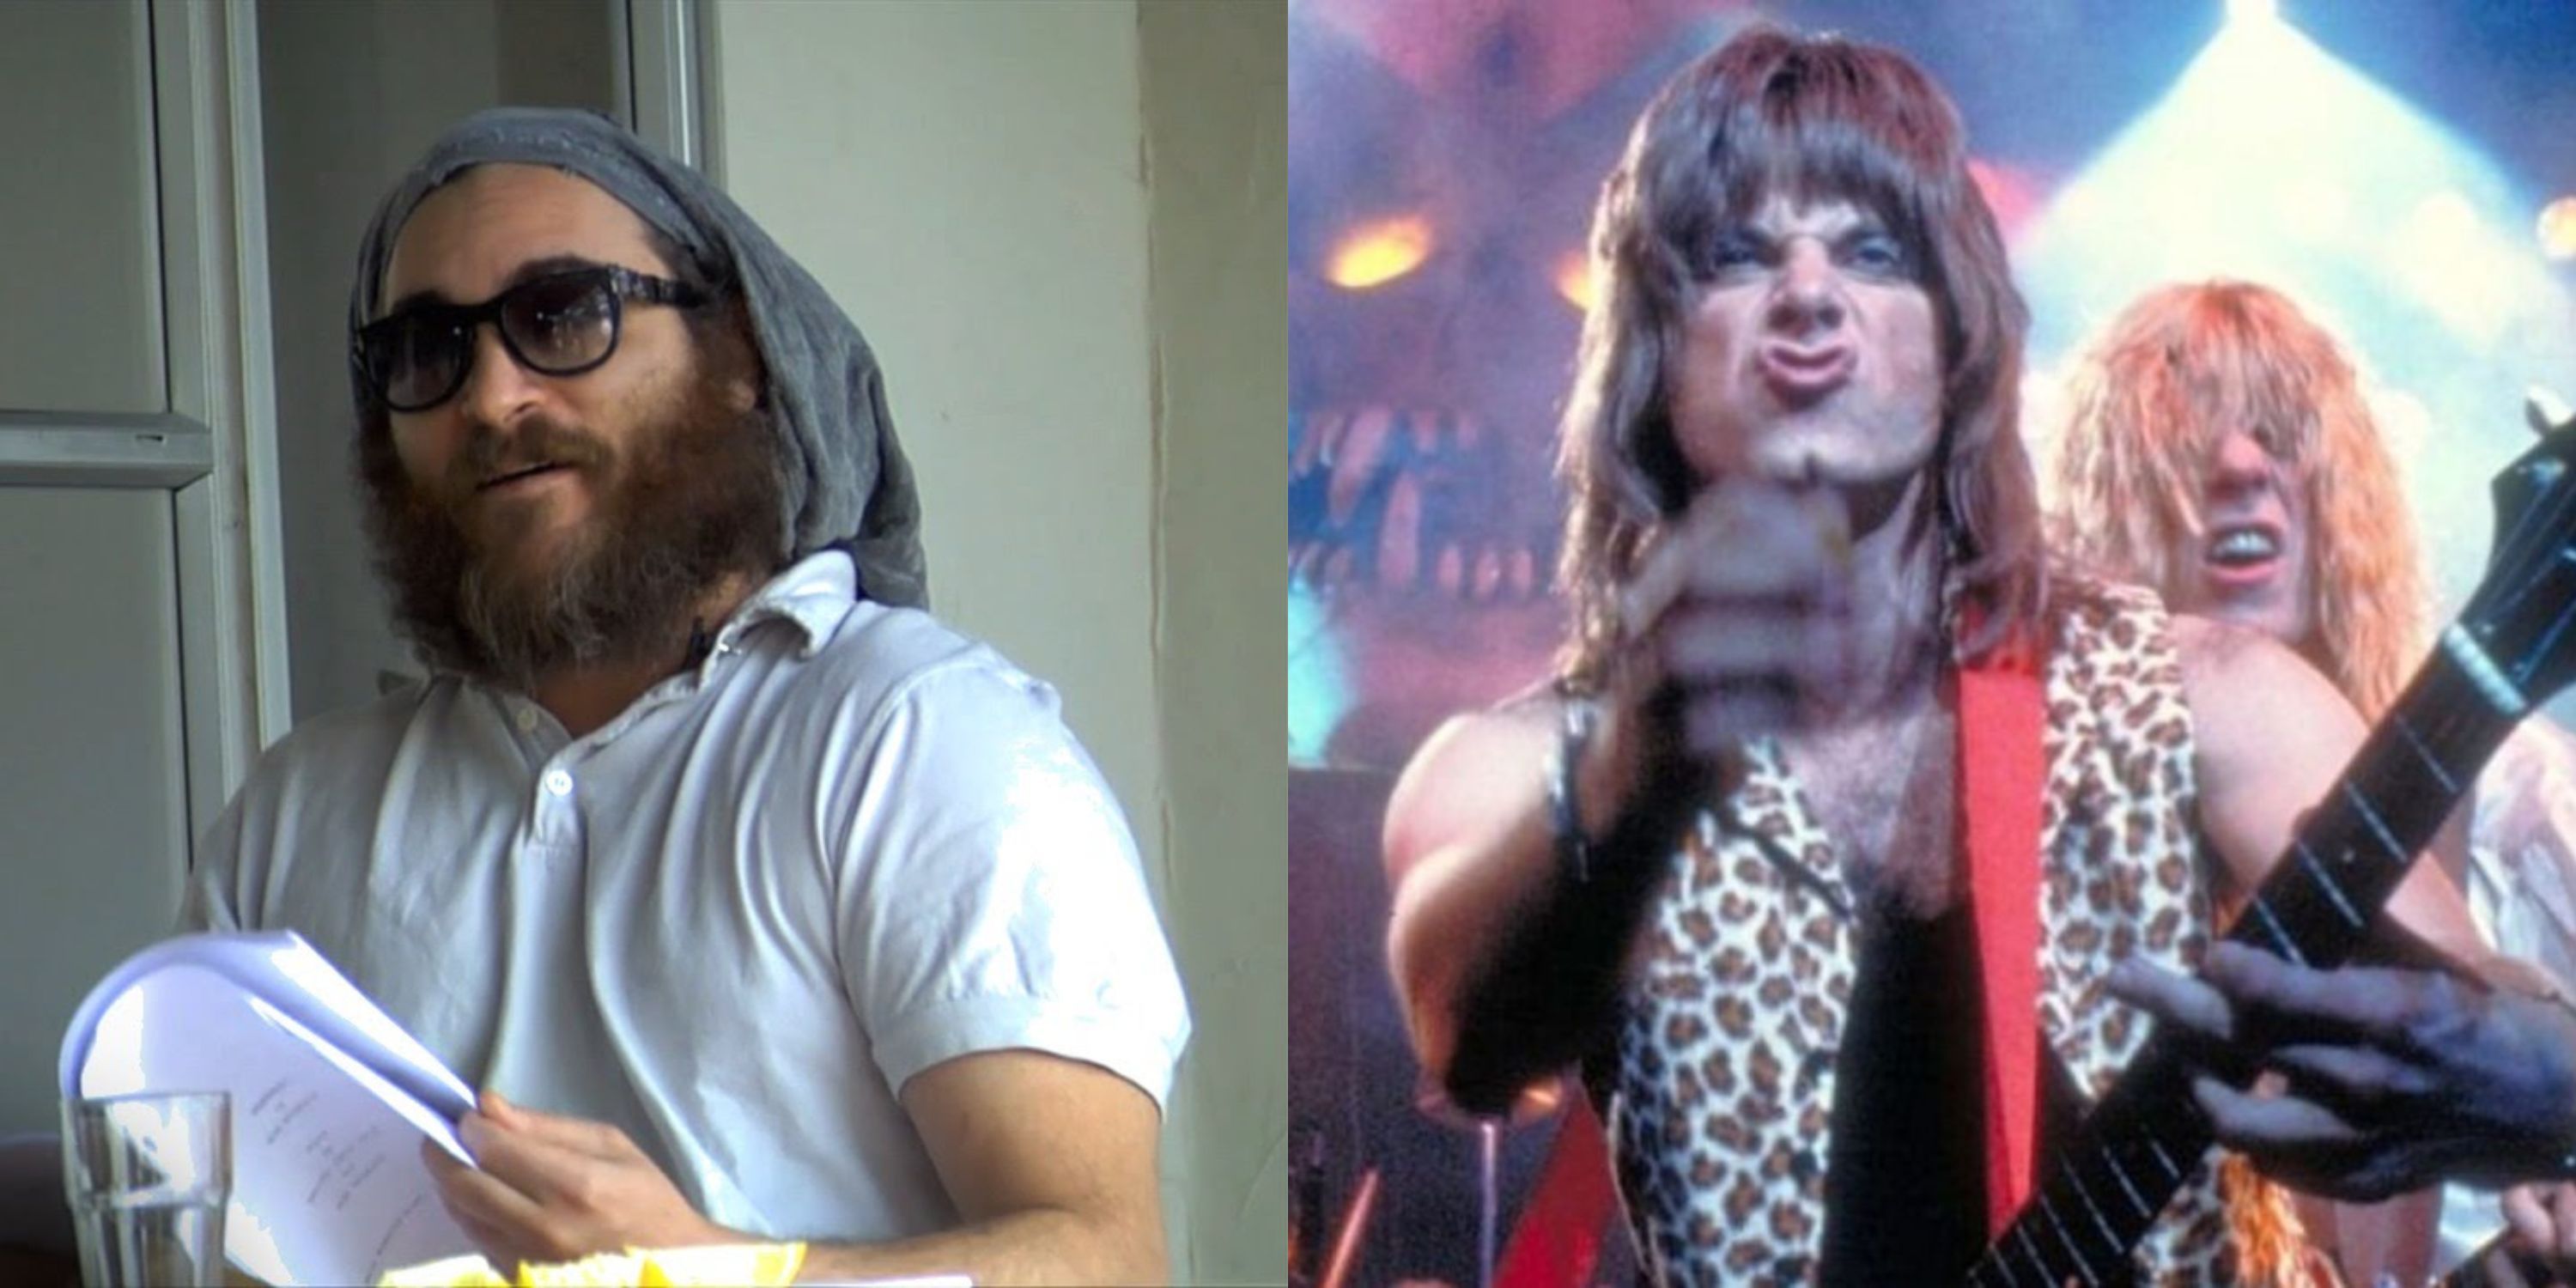 Featured image with Joaquin Phoenix in Im Still Here and the band members of Spinal Tap in This is Spinal Tap